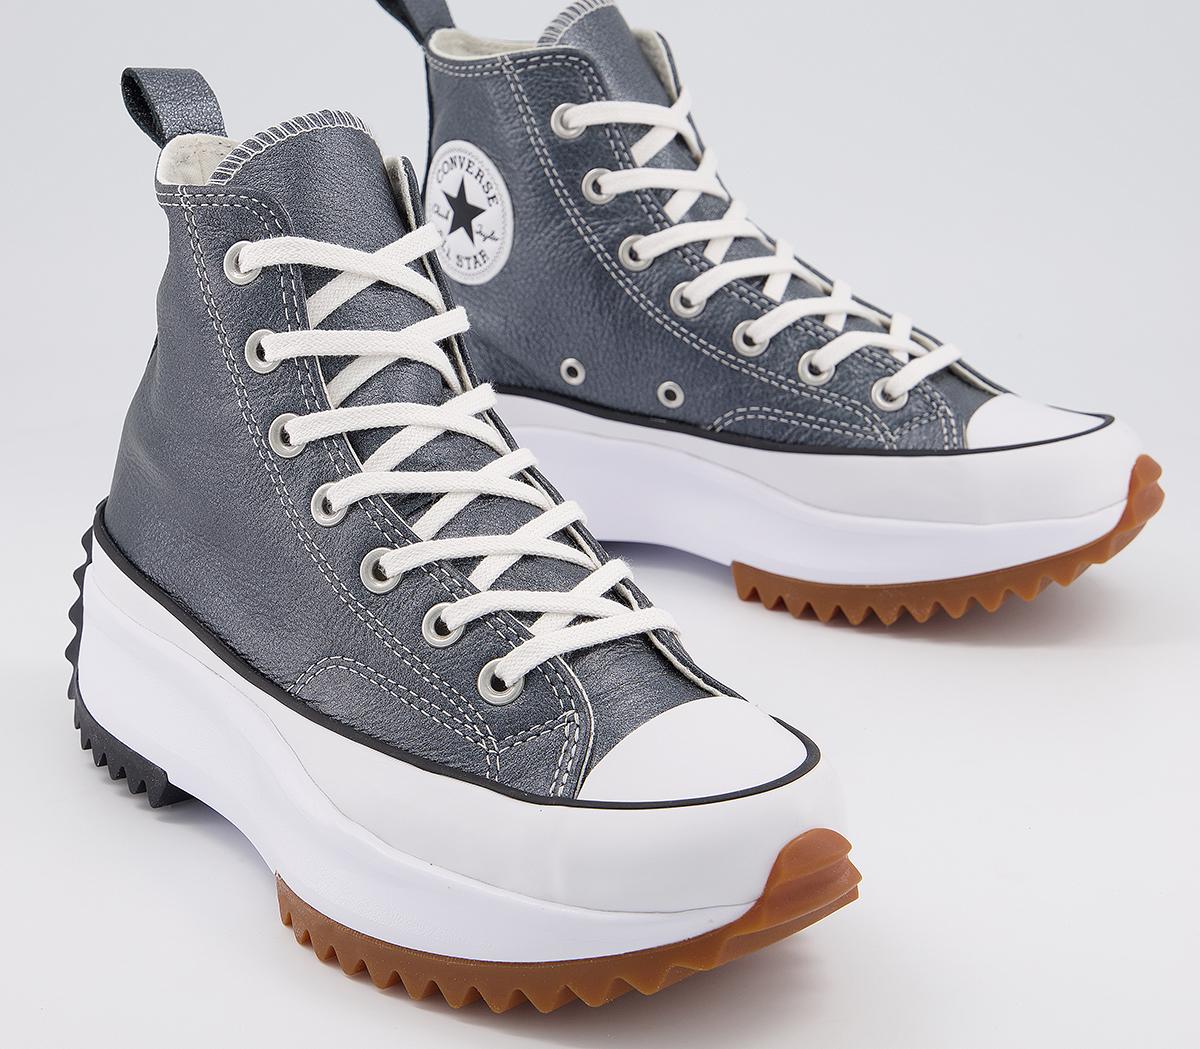 Converse Run Star Hike Trainers Egret Pearl Leather White Black - His trainers